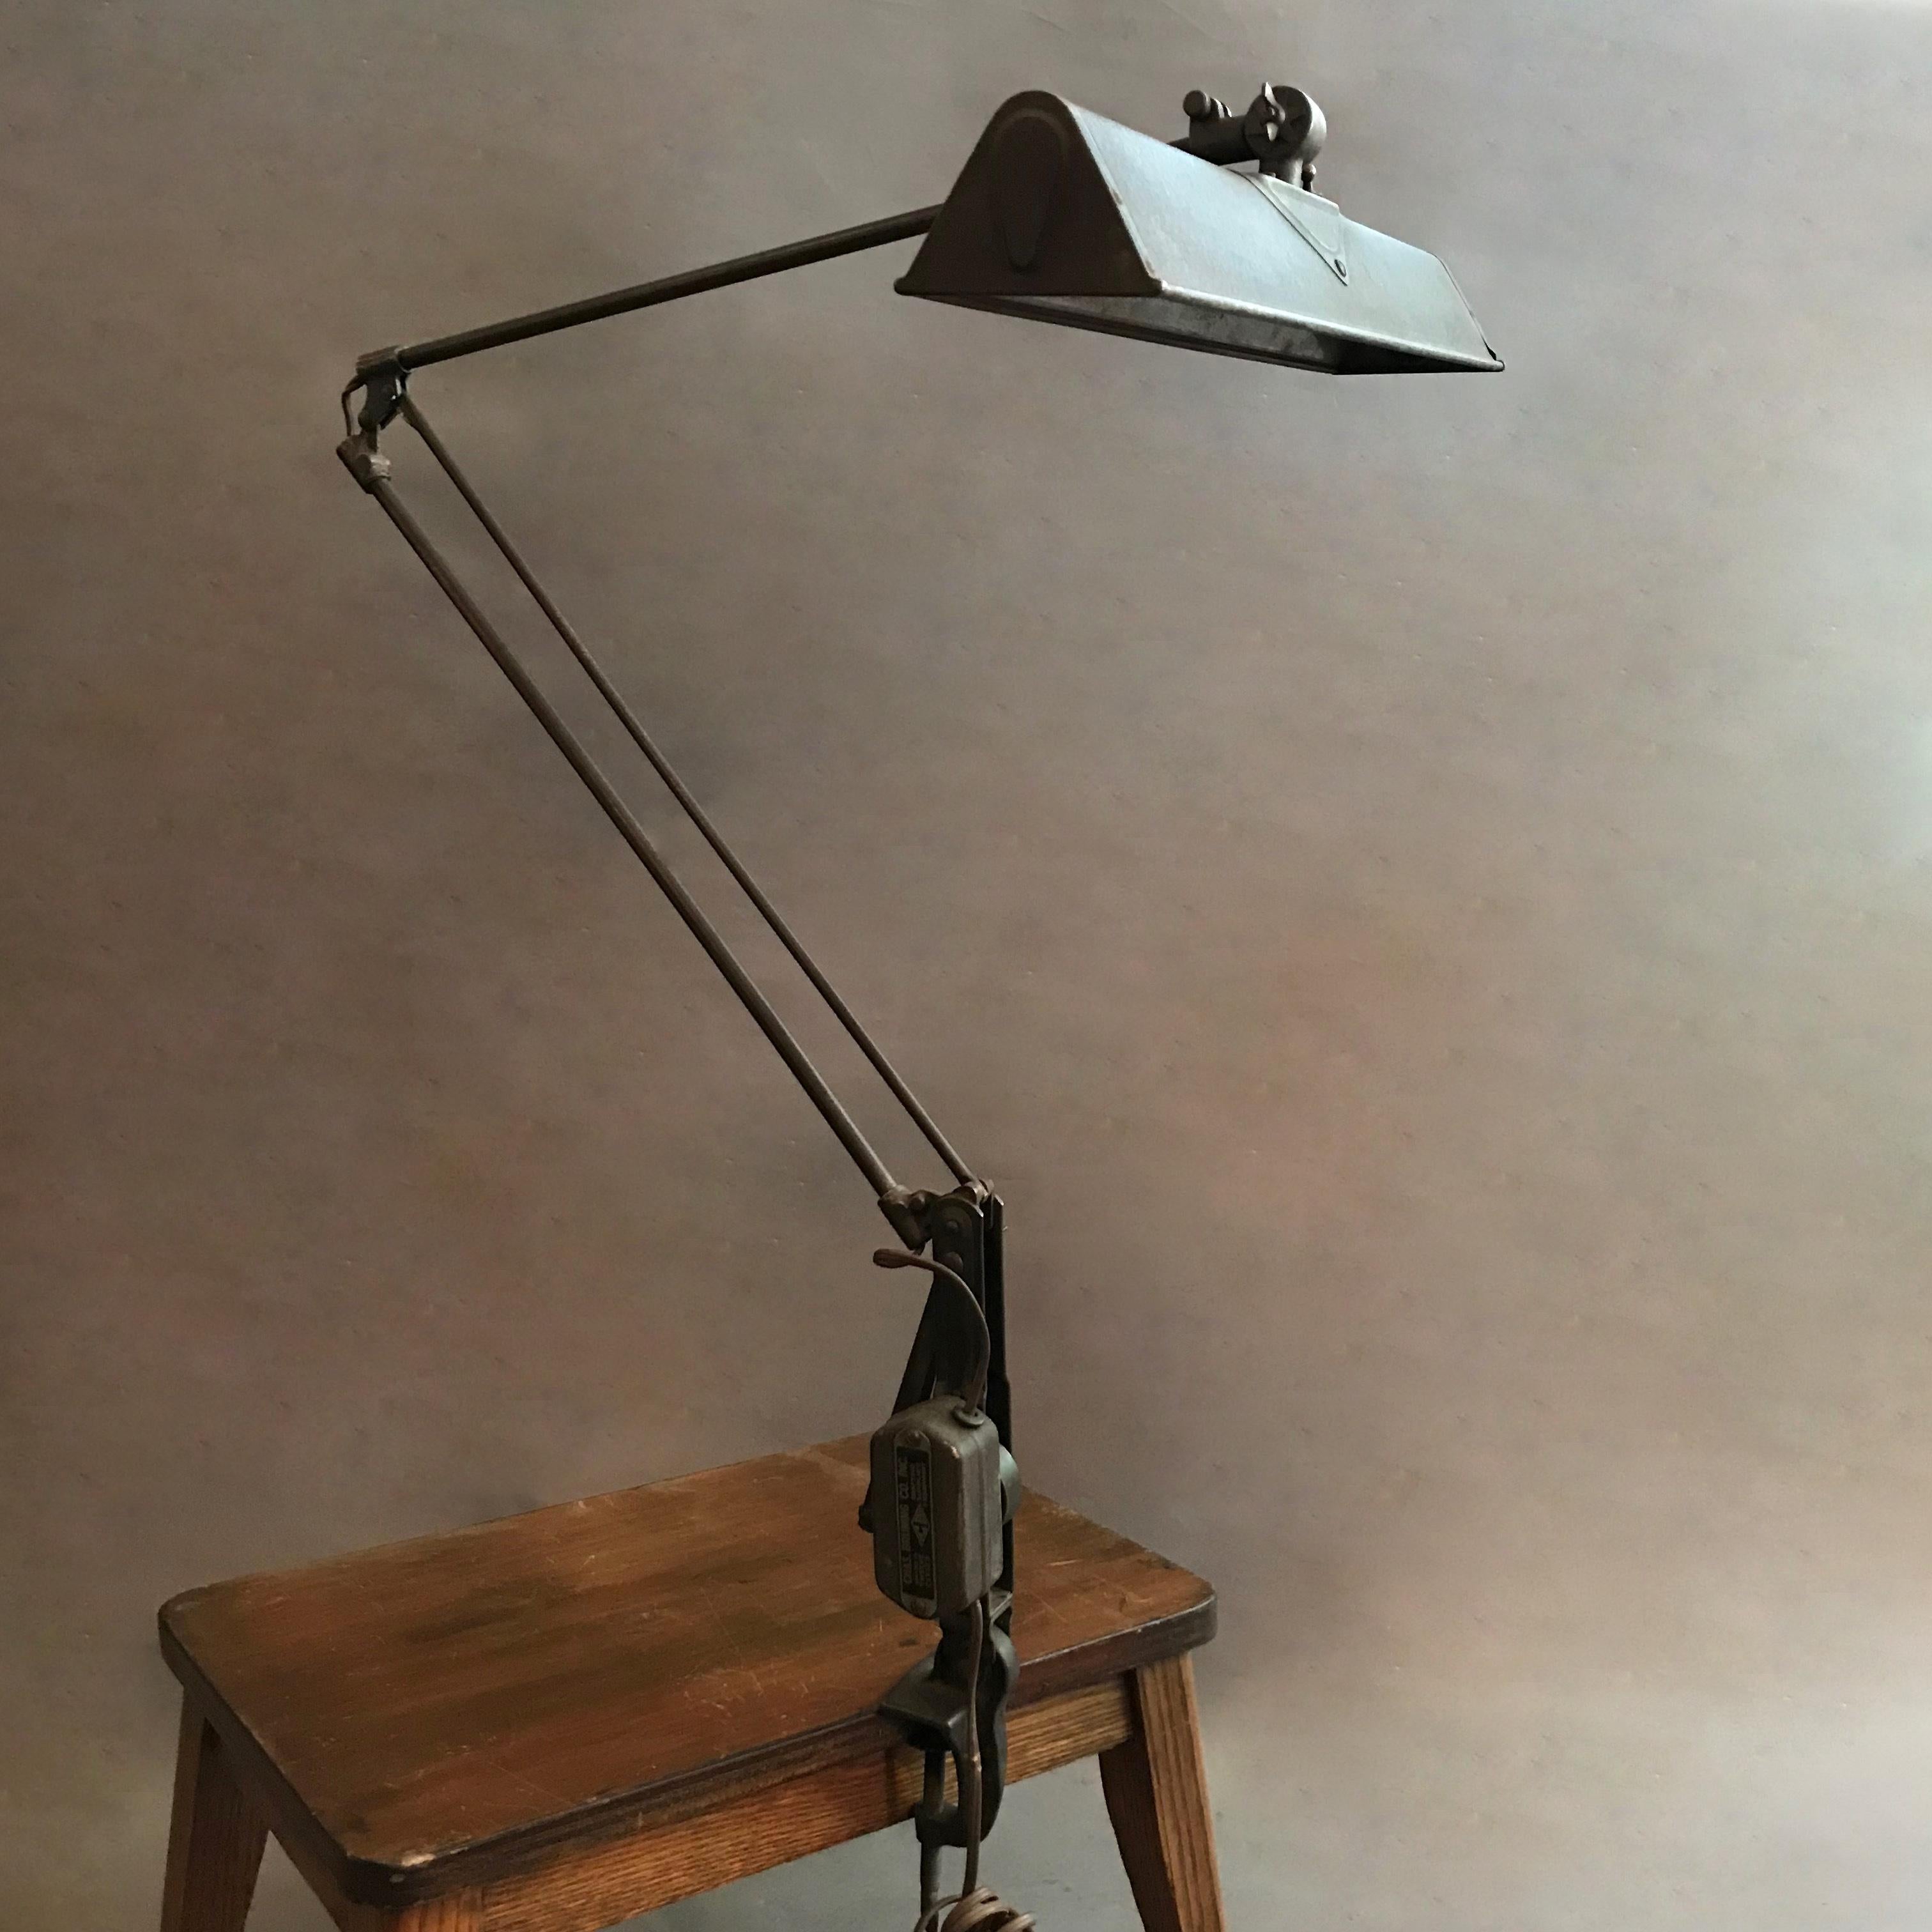 Industrial, architect's, drafting work lamp is painted steel with reflective shade interior features adjustable spring-arm movement and surface clamp. The lamp accepts two medium socket bulbs up to 75 watts each.